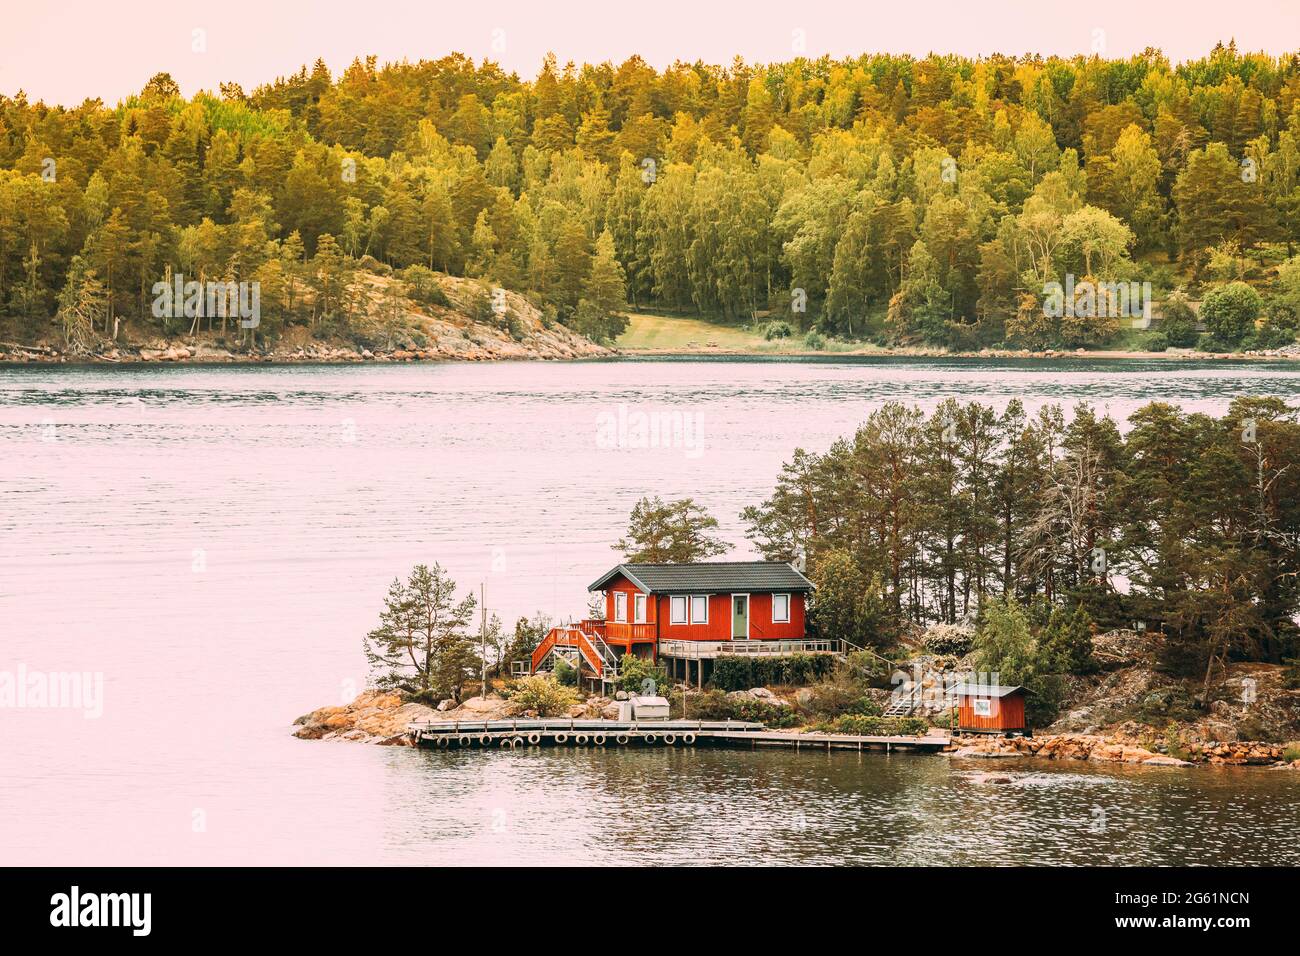 Sweden. Many Beautiful Red Swedish Wooden Log Cabin House On Rocky Island  Coast In Summer. Lake Or River Landscape Stock Photo - Alamy